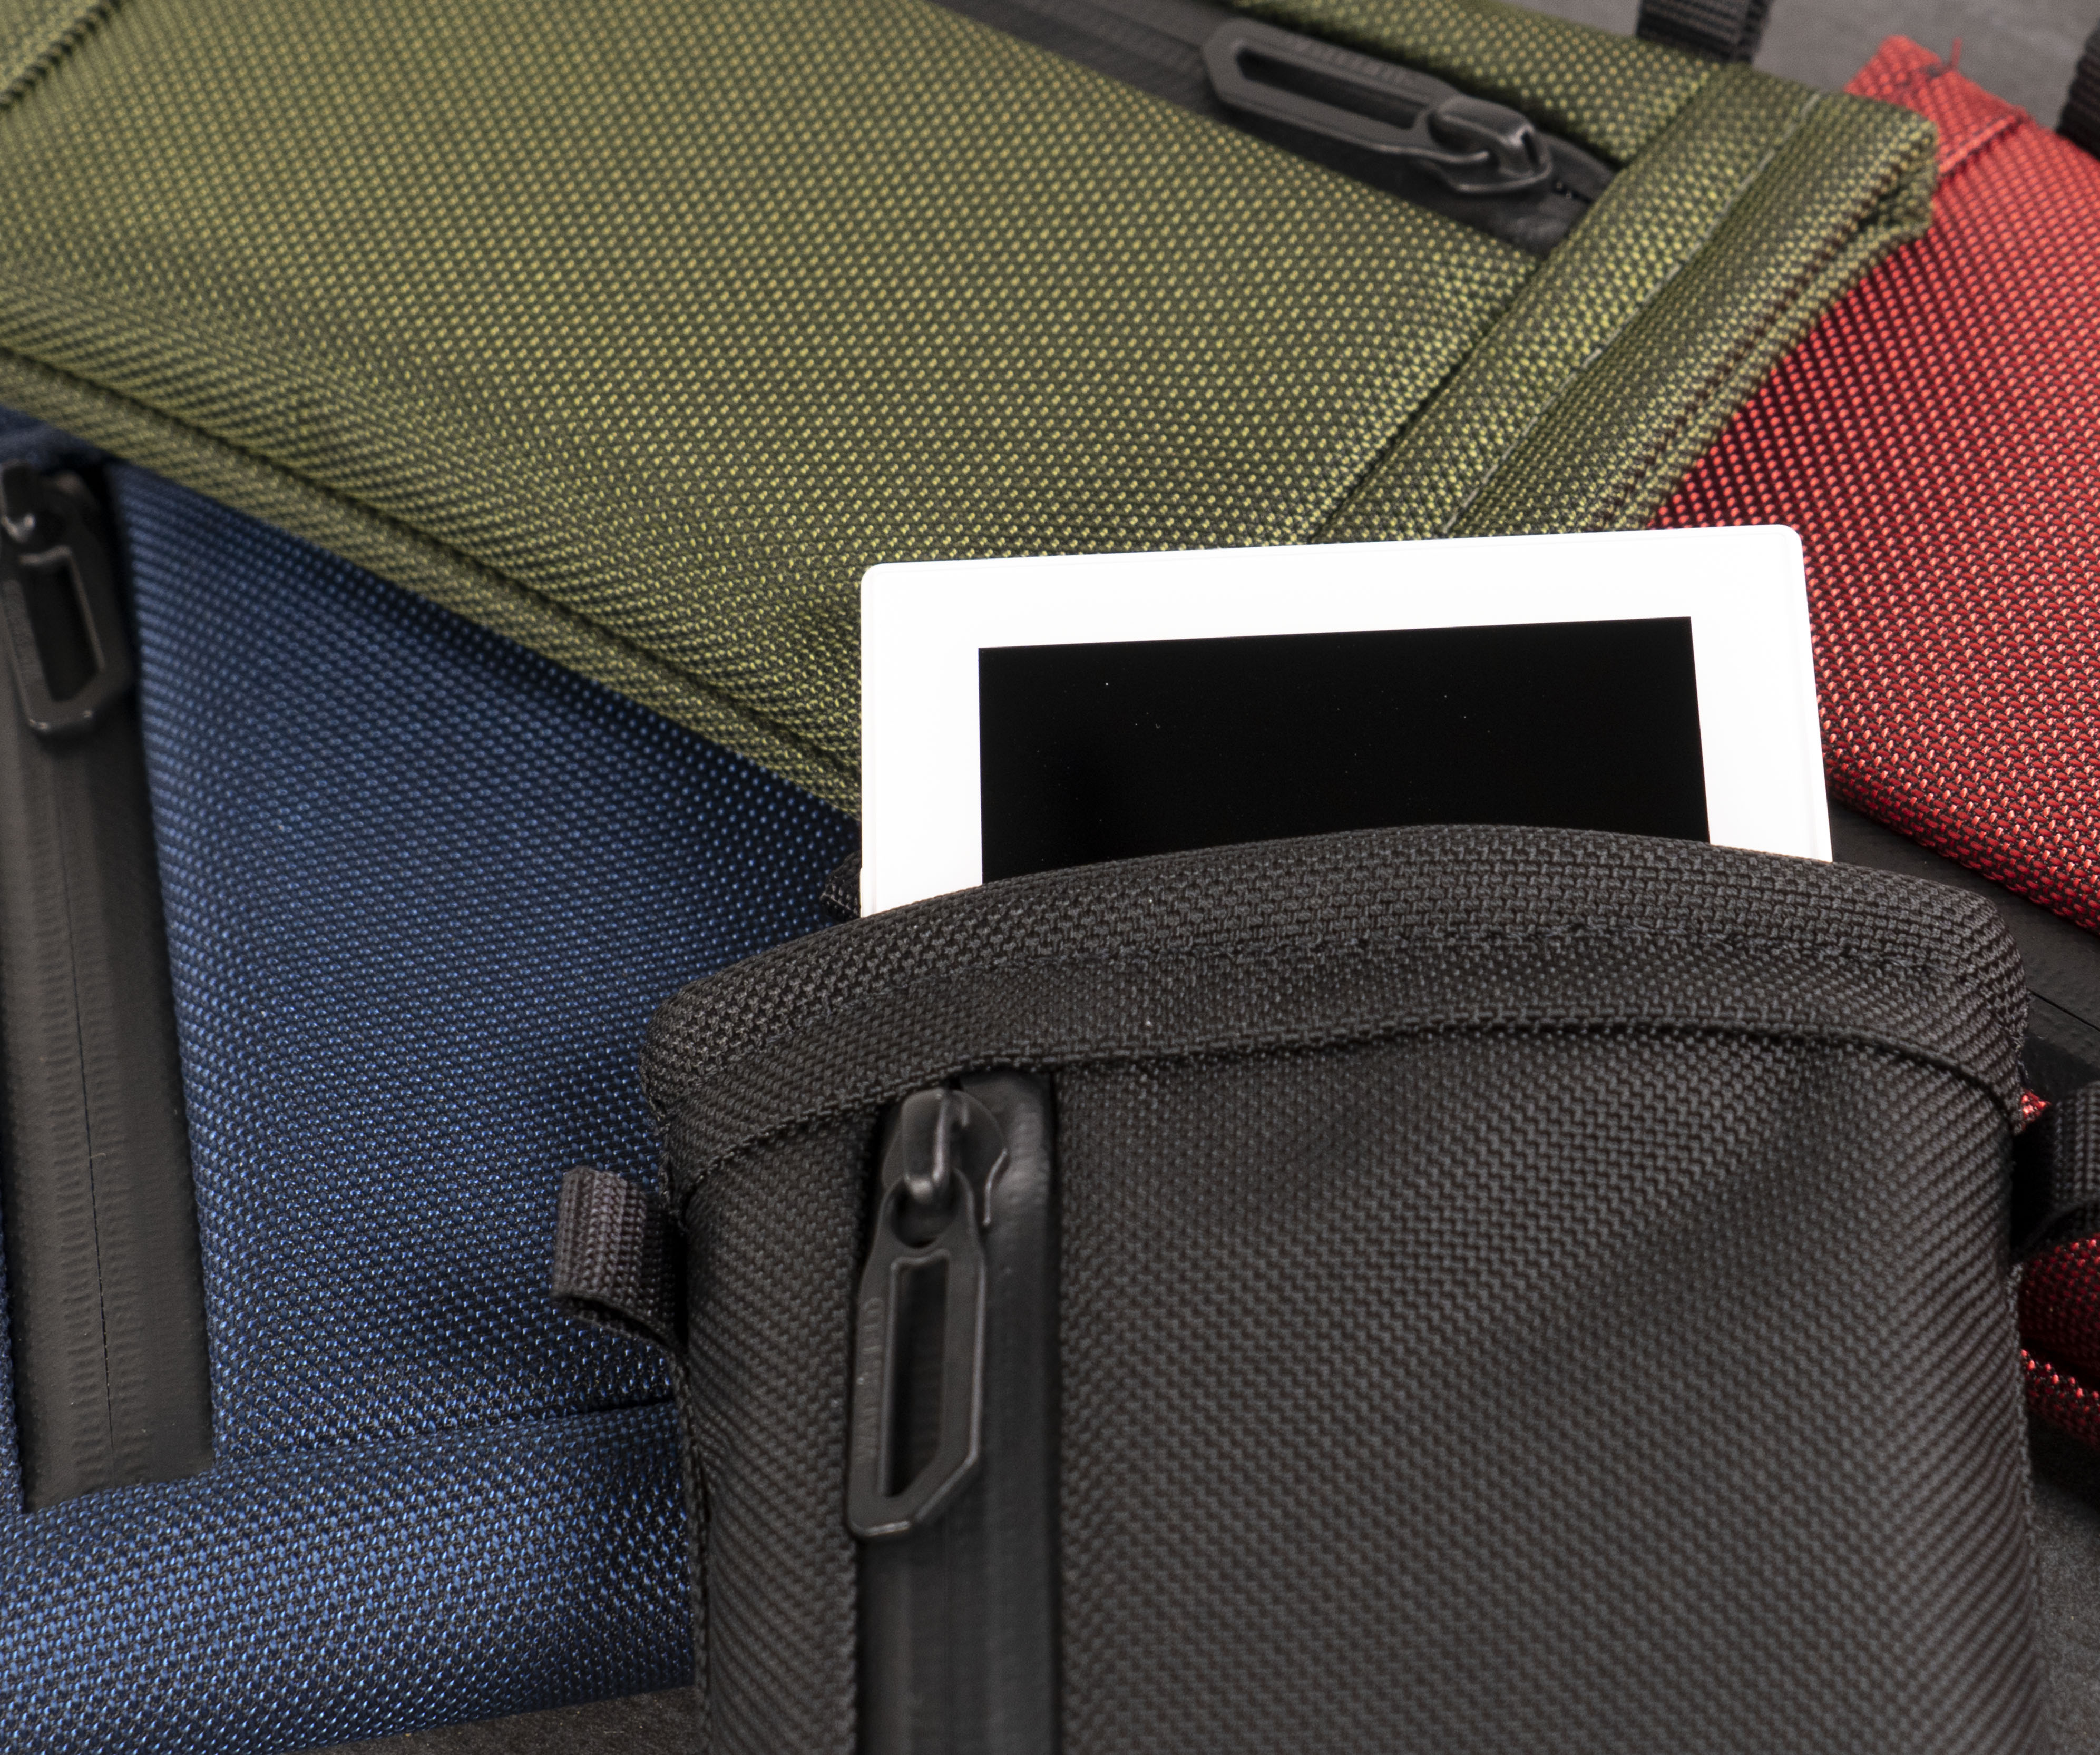 Analogue Pocket Pouch in four color choices